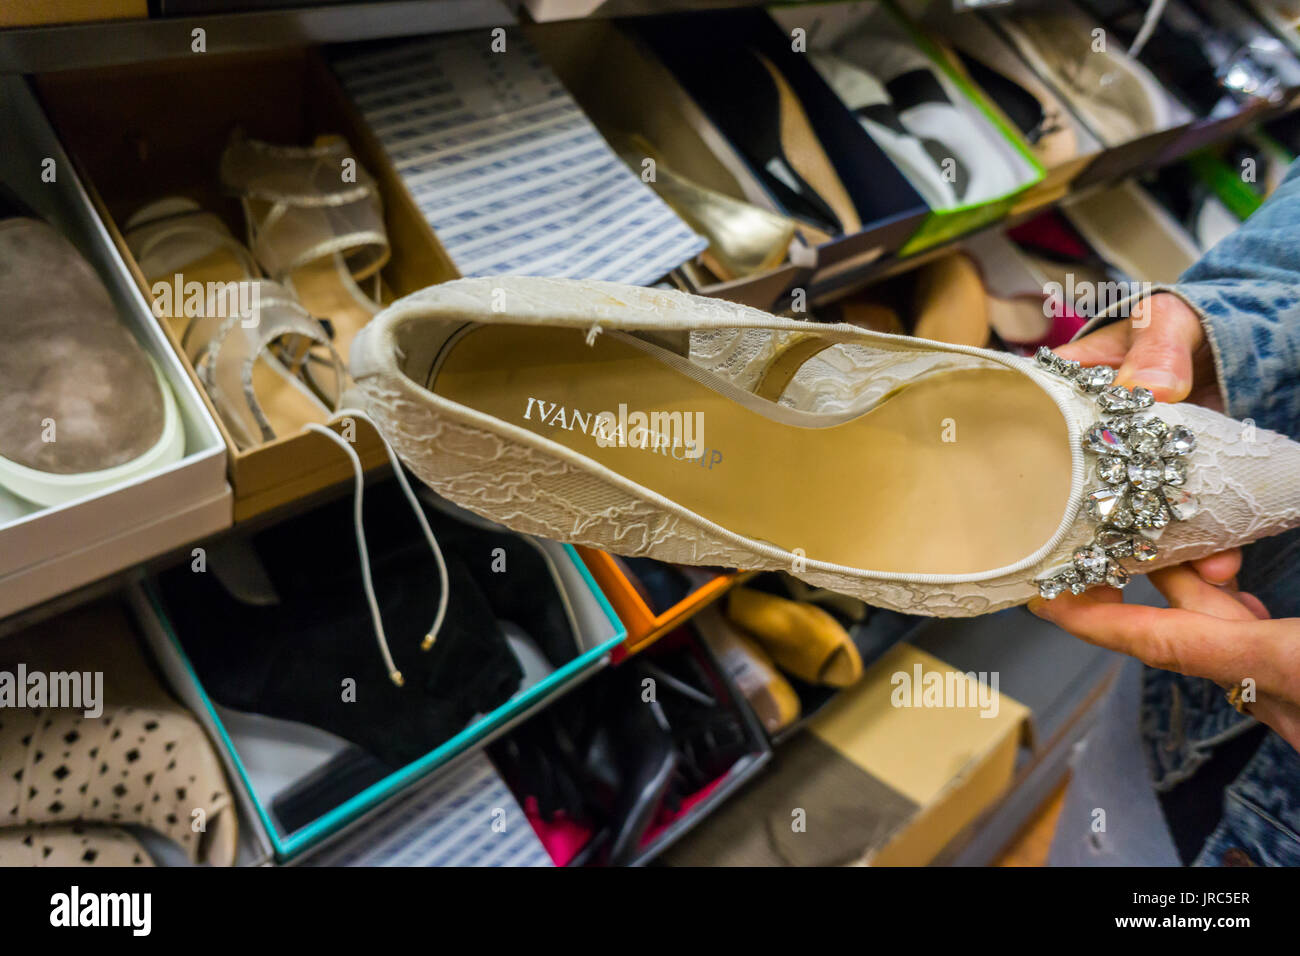 A shopper admires Ivanka Trump designer shoes being sold in an off-price retailer's clearance department in New York on Tuesday, July 25, 2017.  (© Richard B. Levine) Stock Photo